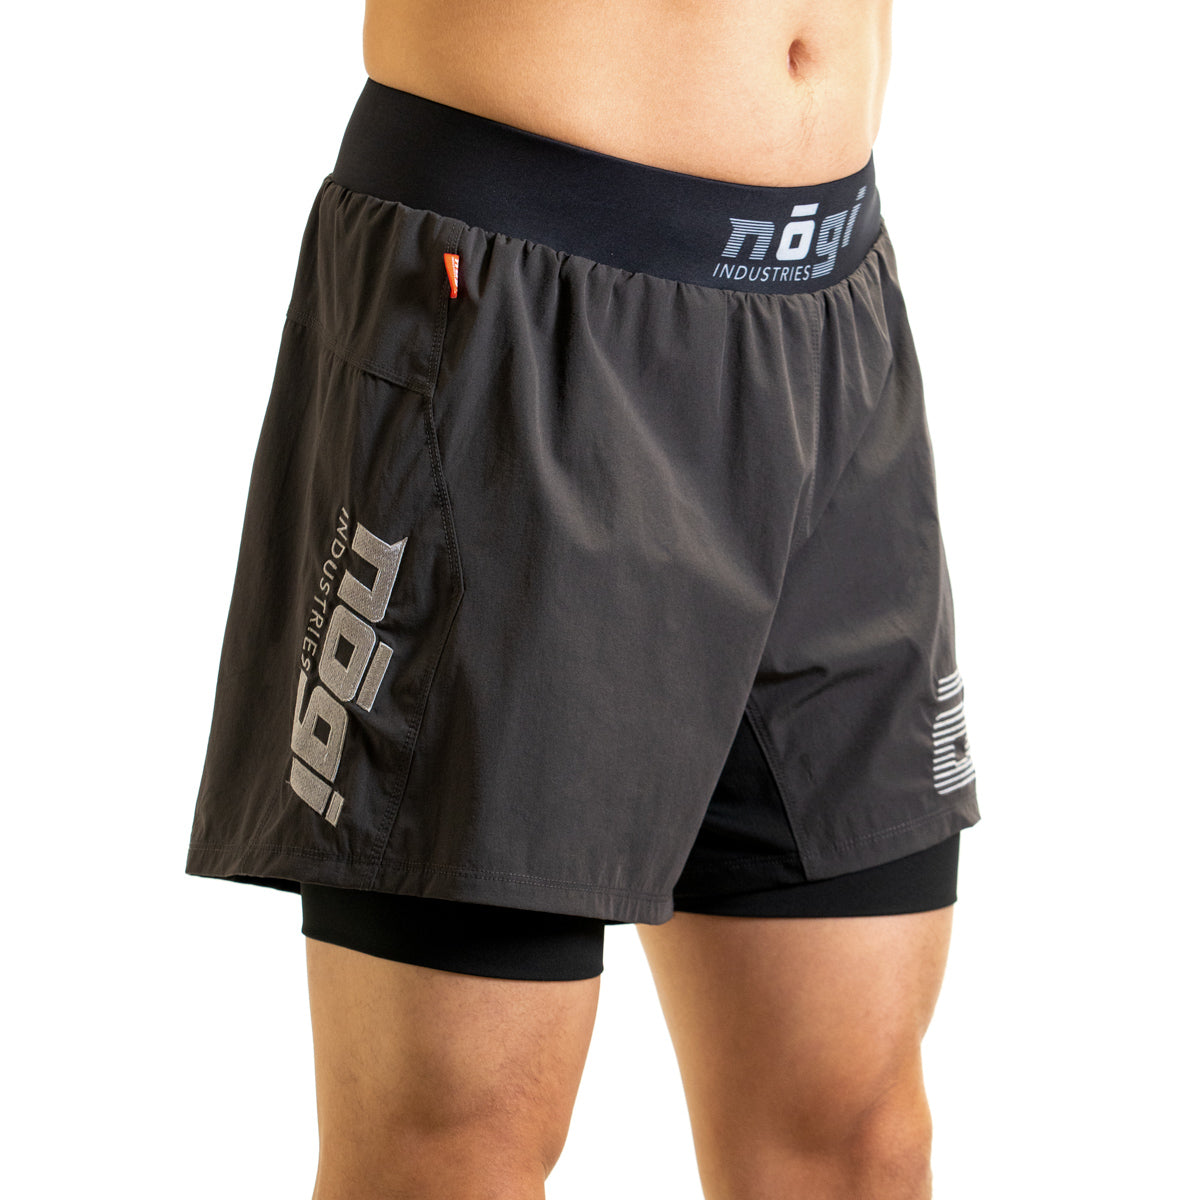 Nogi Industries Ghost Grappling shorts right view